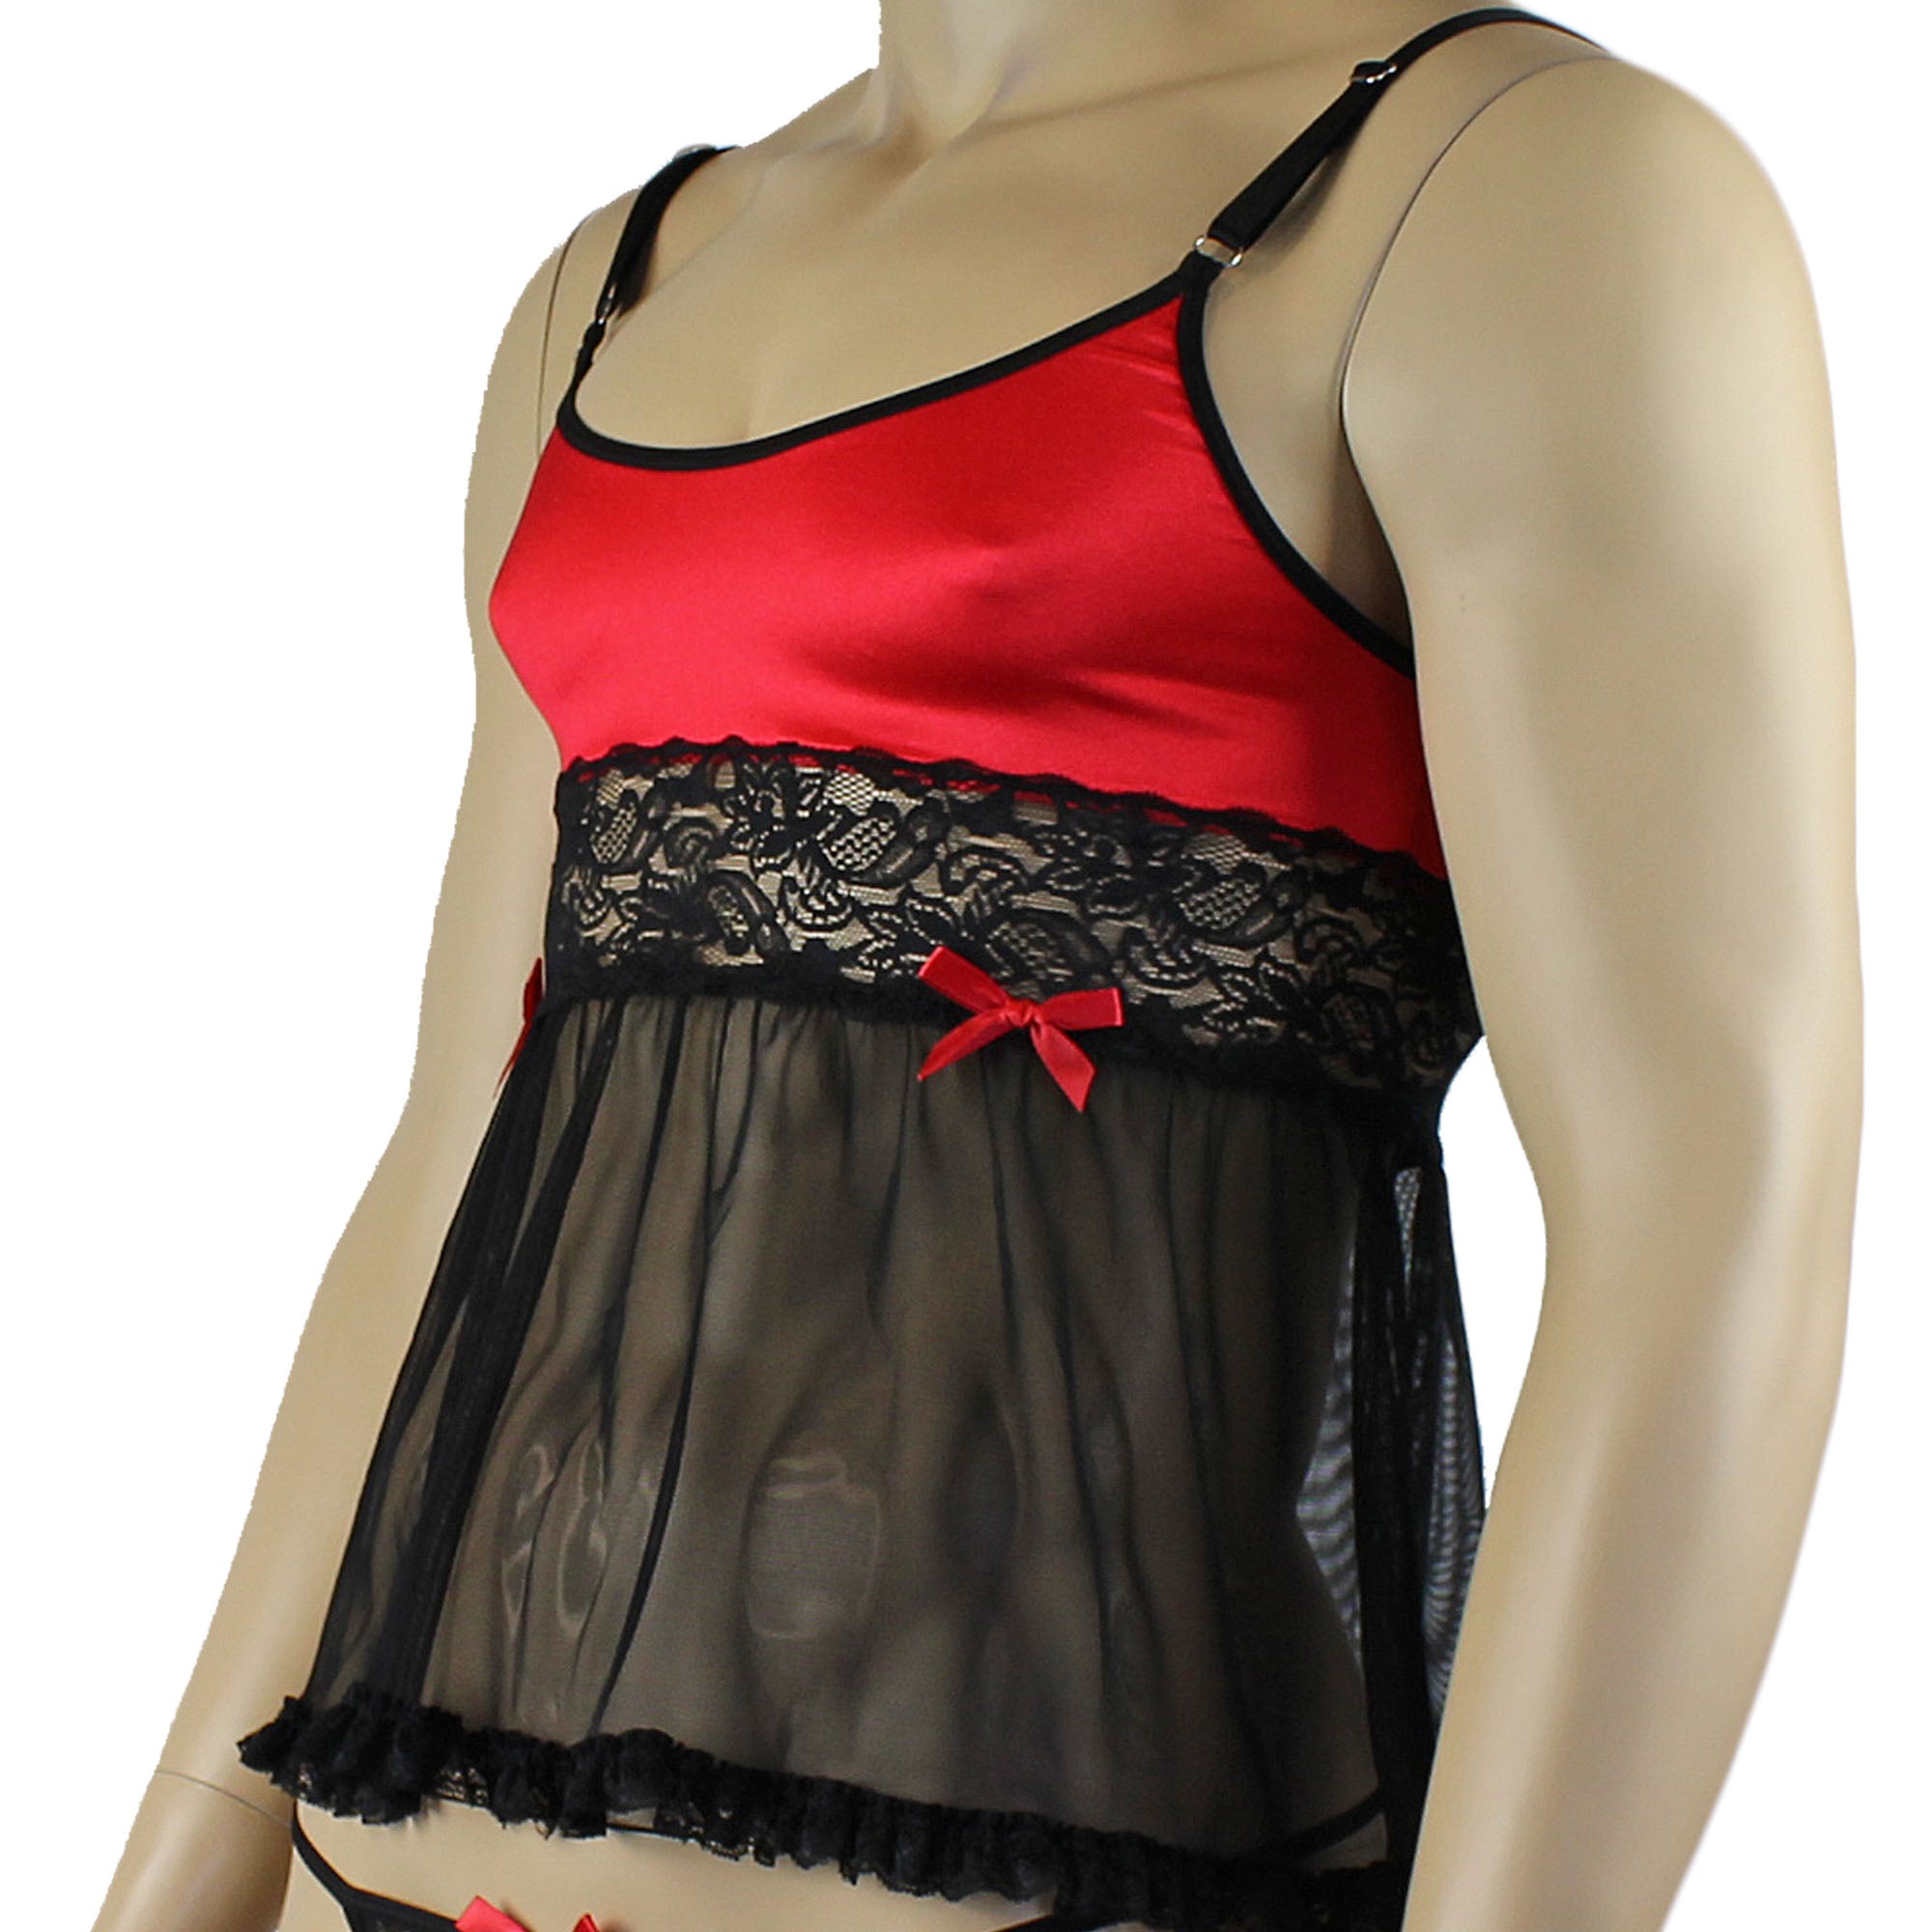 Mens Joanne Mini Babydoll Camisole - Sizes up to 3XL Red & Black Lace